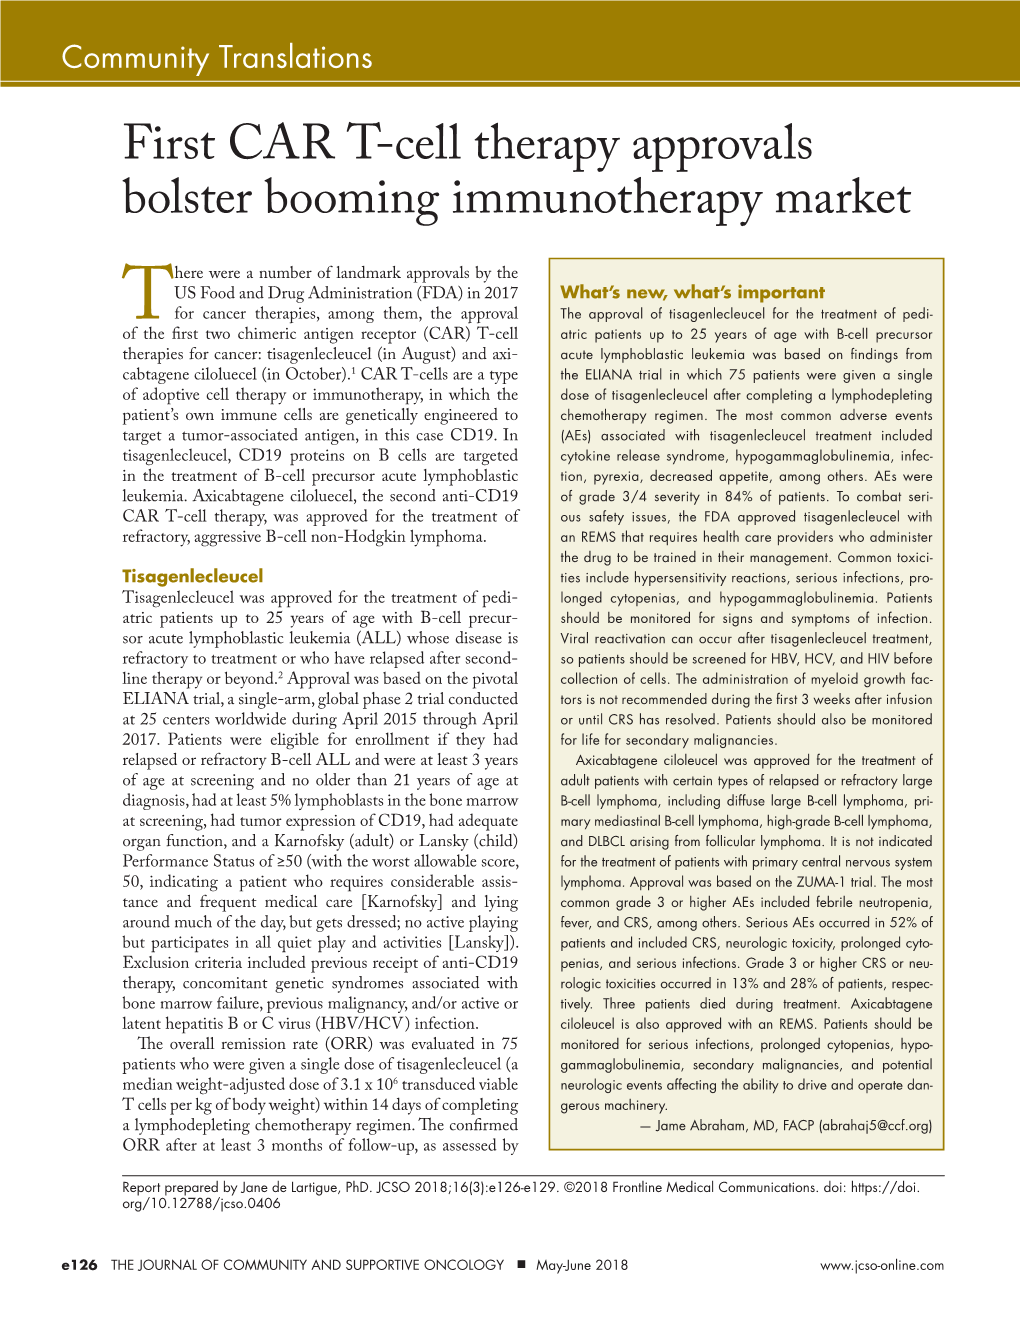 First CAR T-Cell Therapy Approvals Bolster Booming Immunotherapy Market